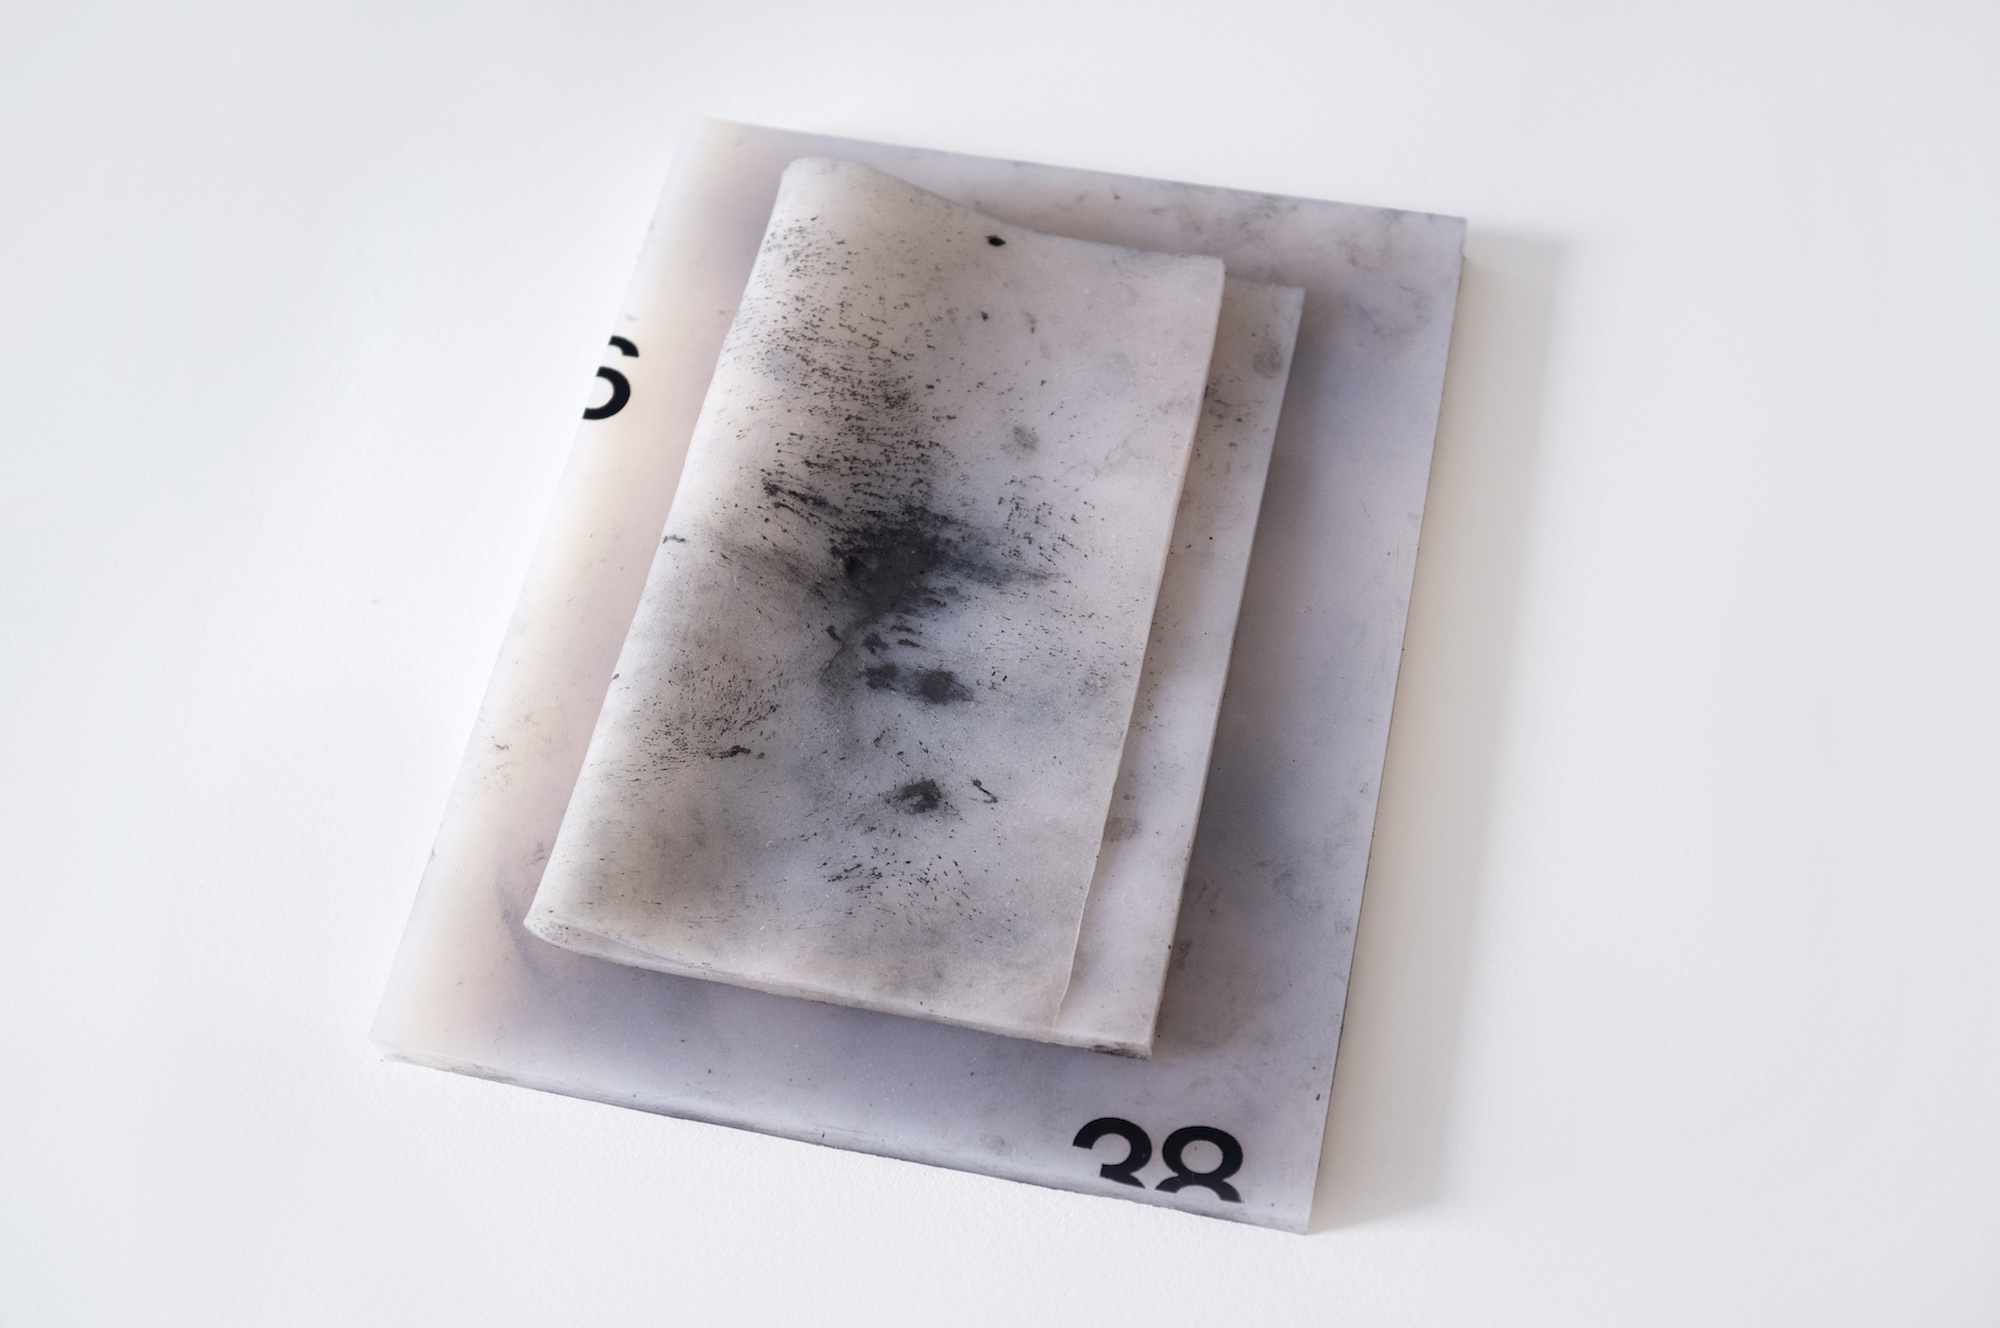 Two flesh toned silicone rectangles sit on top of one another covered in crushed graphite smudges. The number 38, cut off by the edge, sits in the bottom right corner.